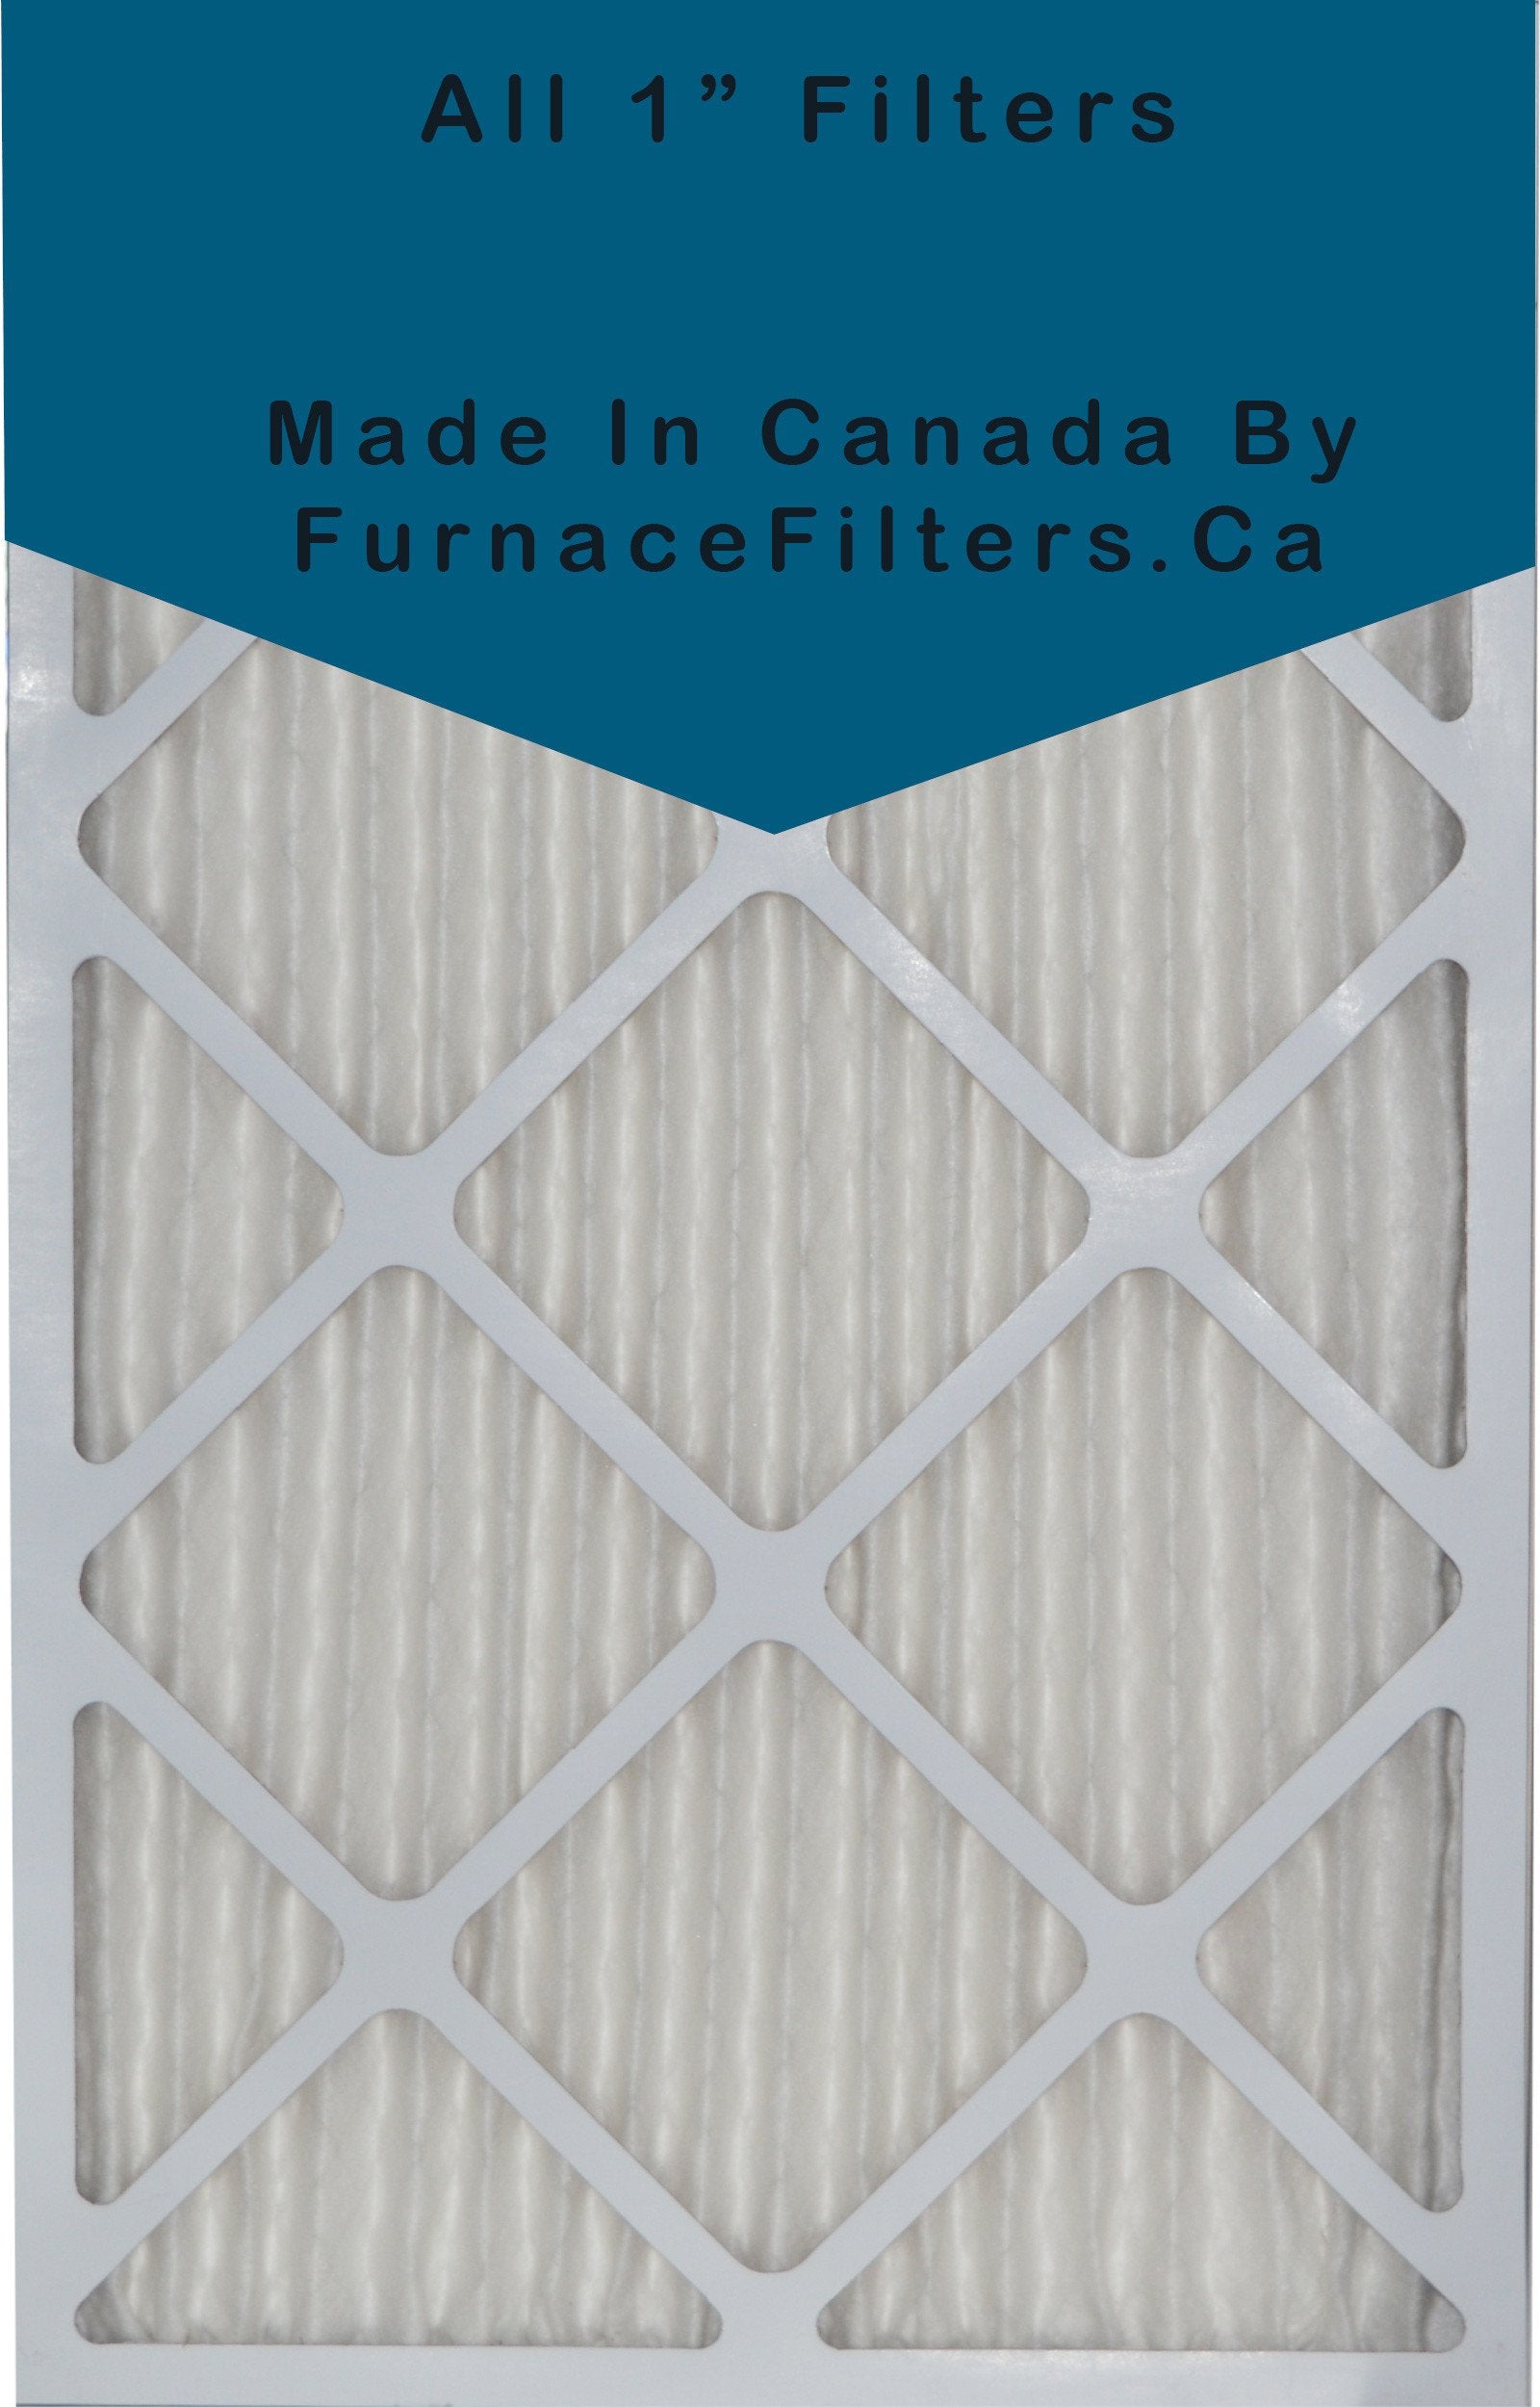 30x36x1 Furnace Filter MERV 8 Pleated Filters. Case of 6